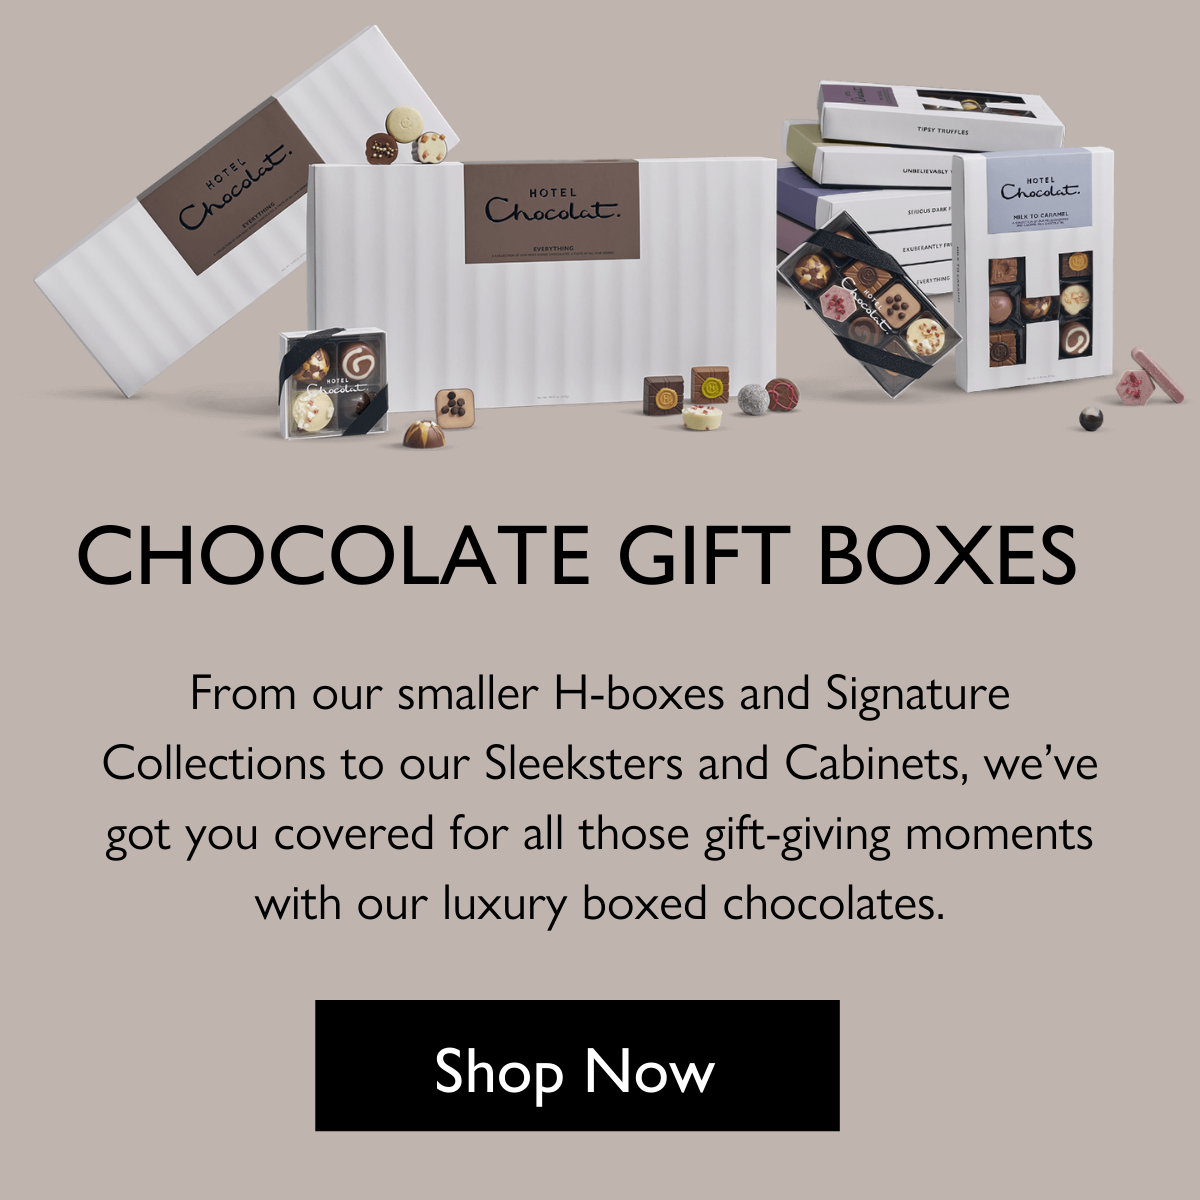 Chocolate gift boxes. From our smaller H-boxes and signature collections to our sleeksters and cabinets, we've got you covered for all those gift-giving moments with our luxury boxed chocolates